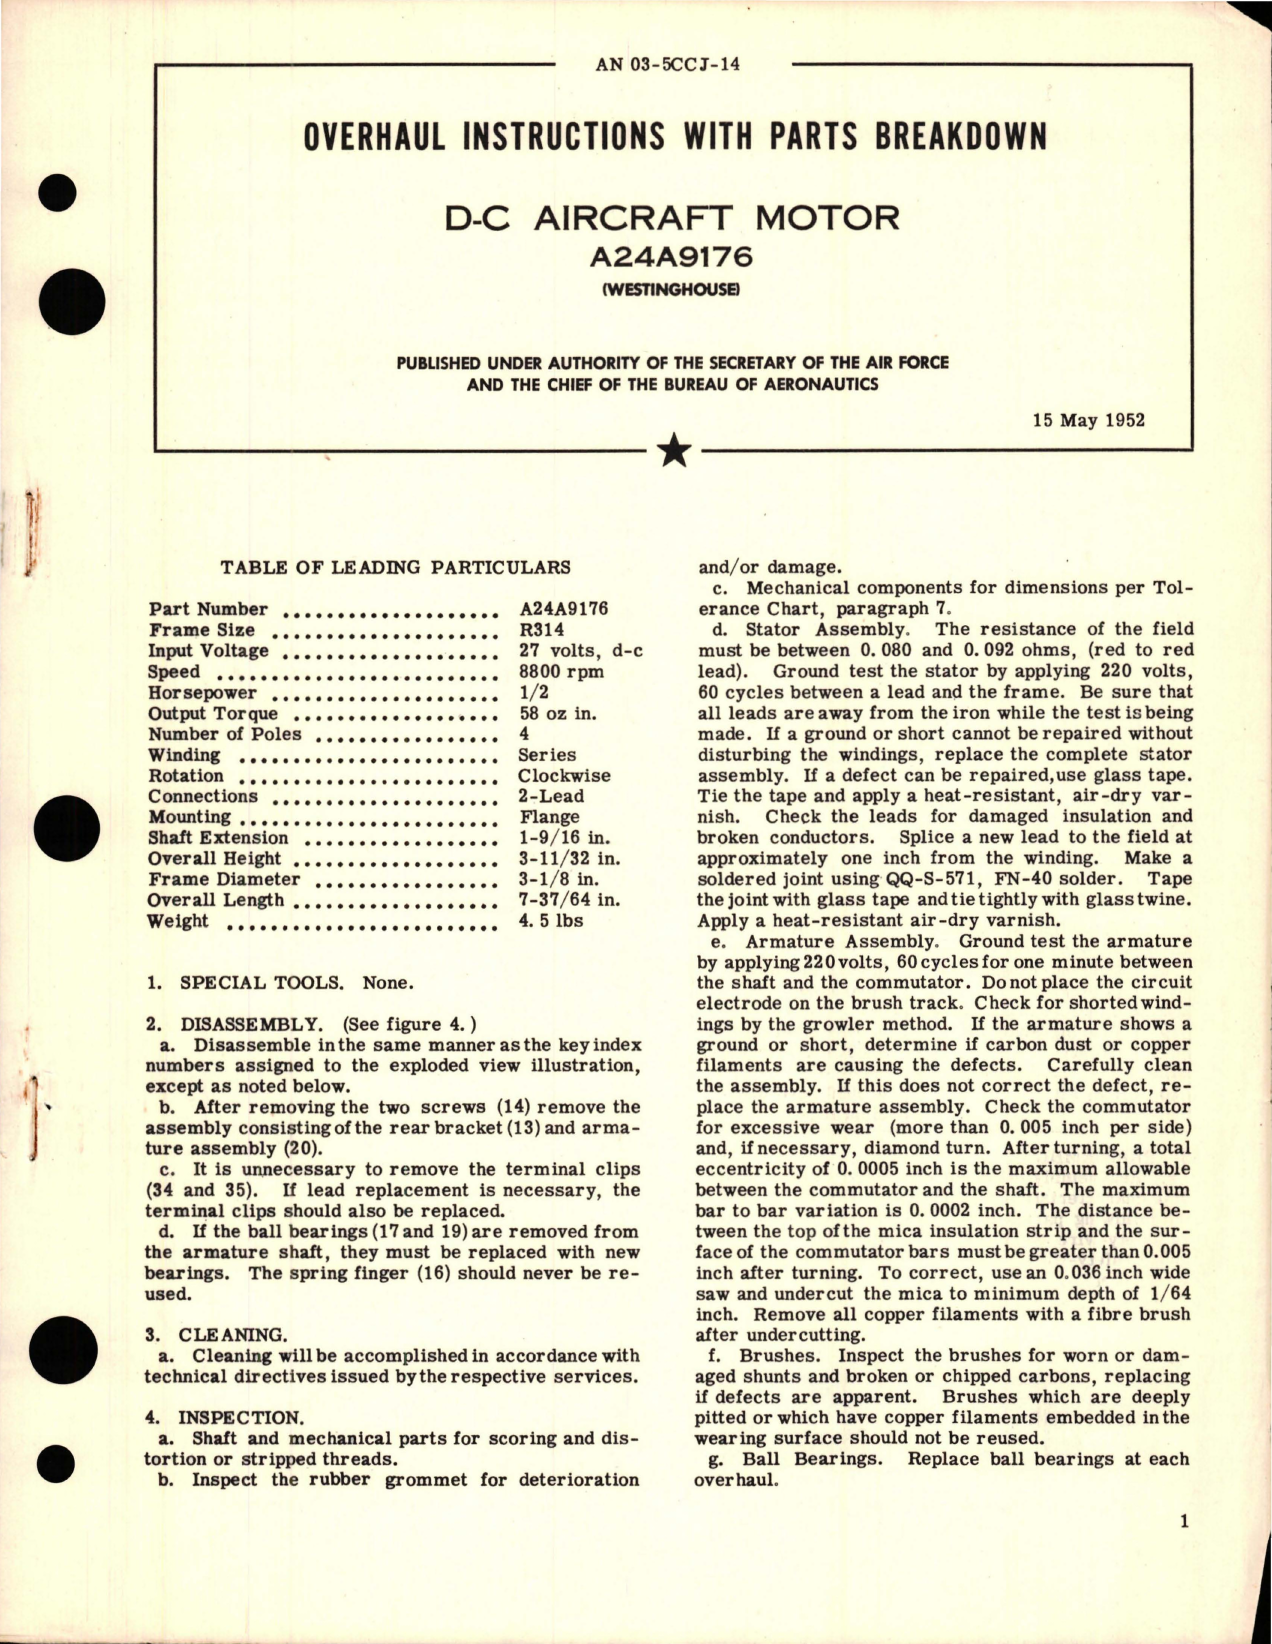 Sample page 1 from AirCorps Library document: Overhaul Instructions with Parts Breakdown for D-C Aircraft Motor - A24A9176